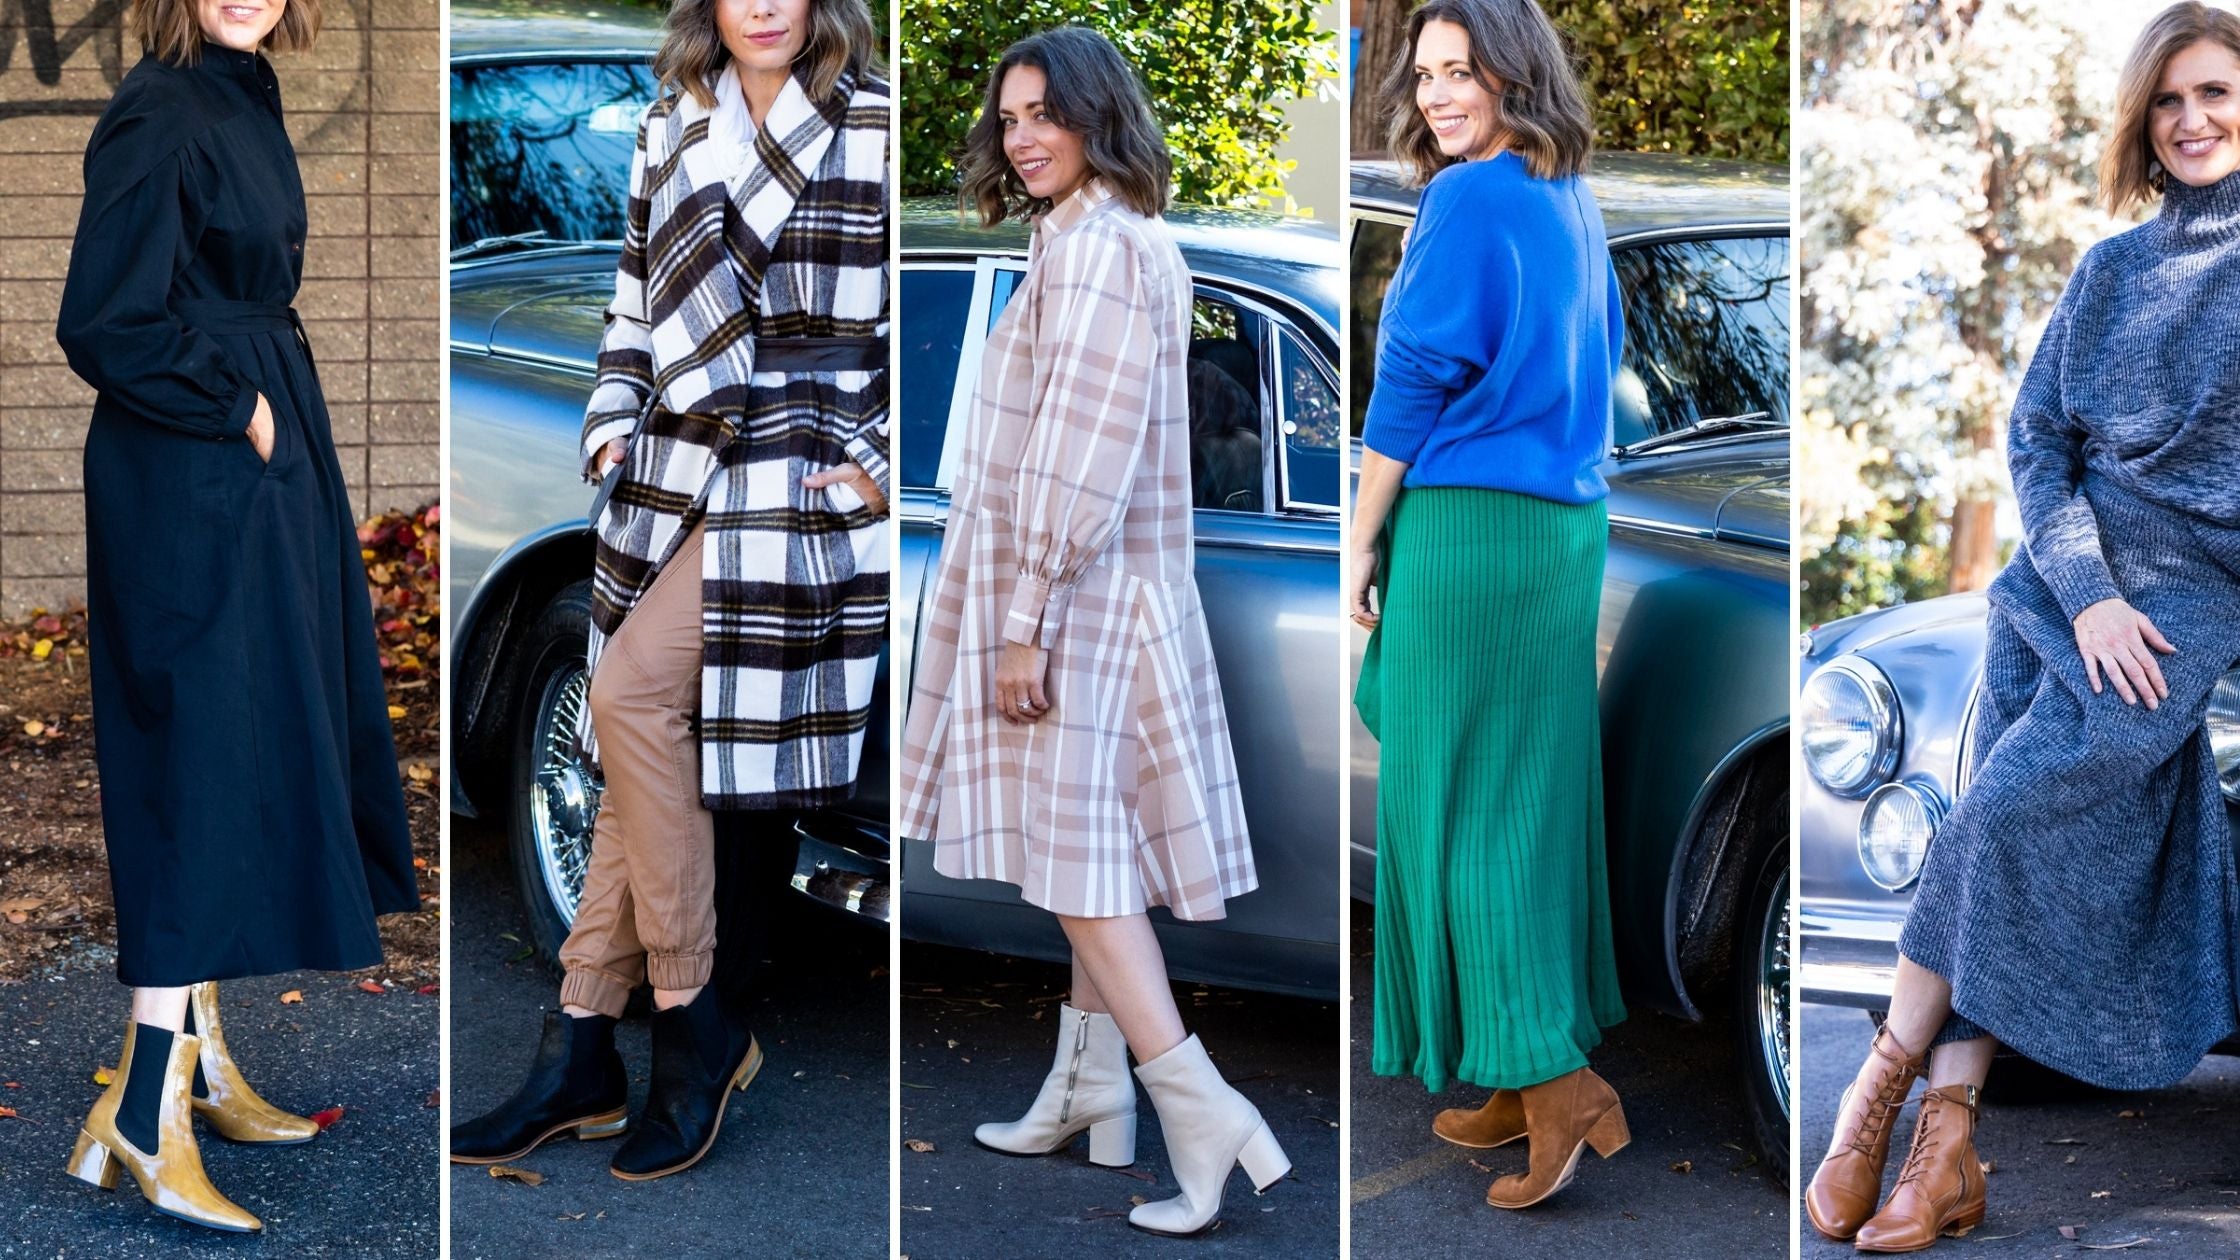 Styling ideas for Autumn Winter 2022 fashion and shoes. A series of Photos of models wearing ankle boots to demonstrate how to style ankle boots this season at Sissa Sorella.